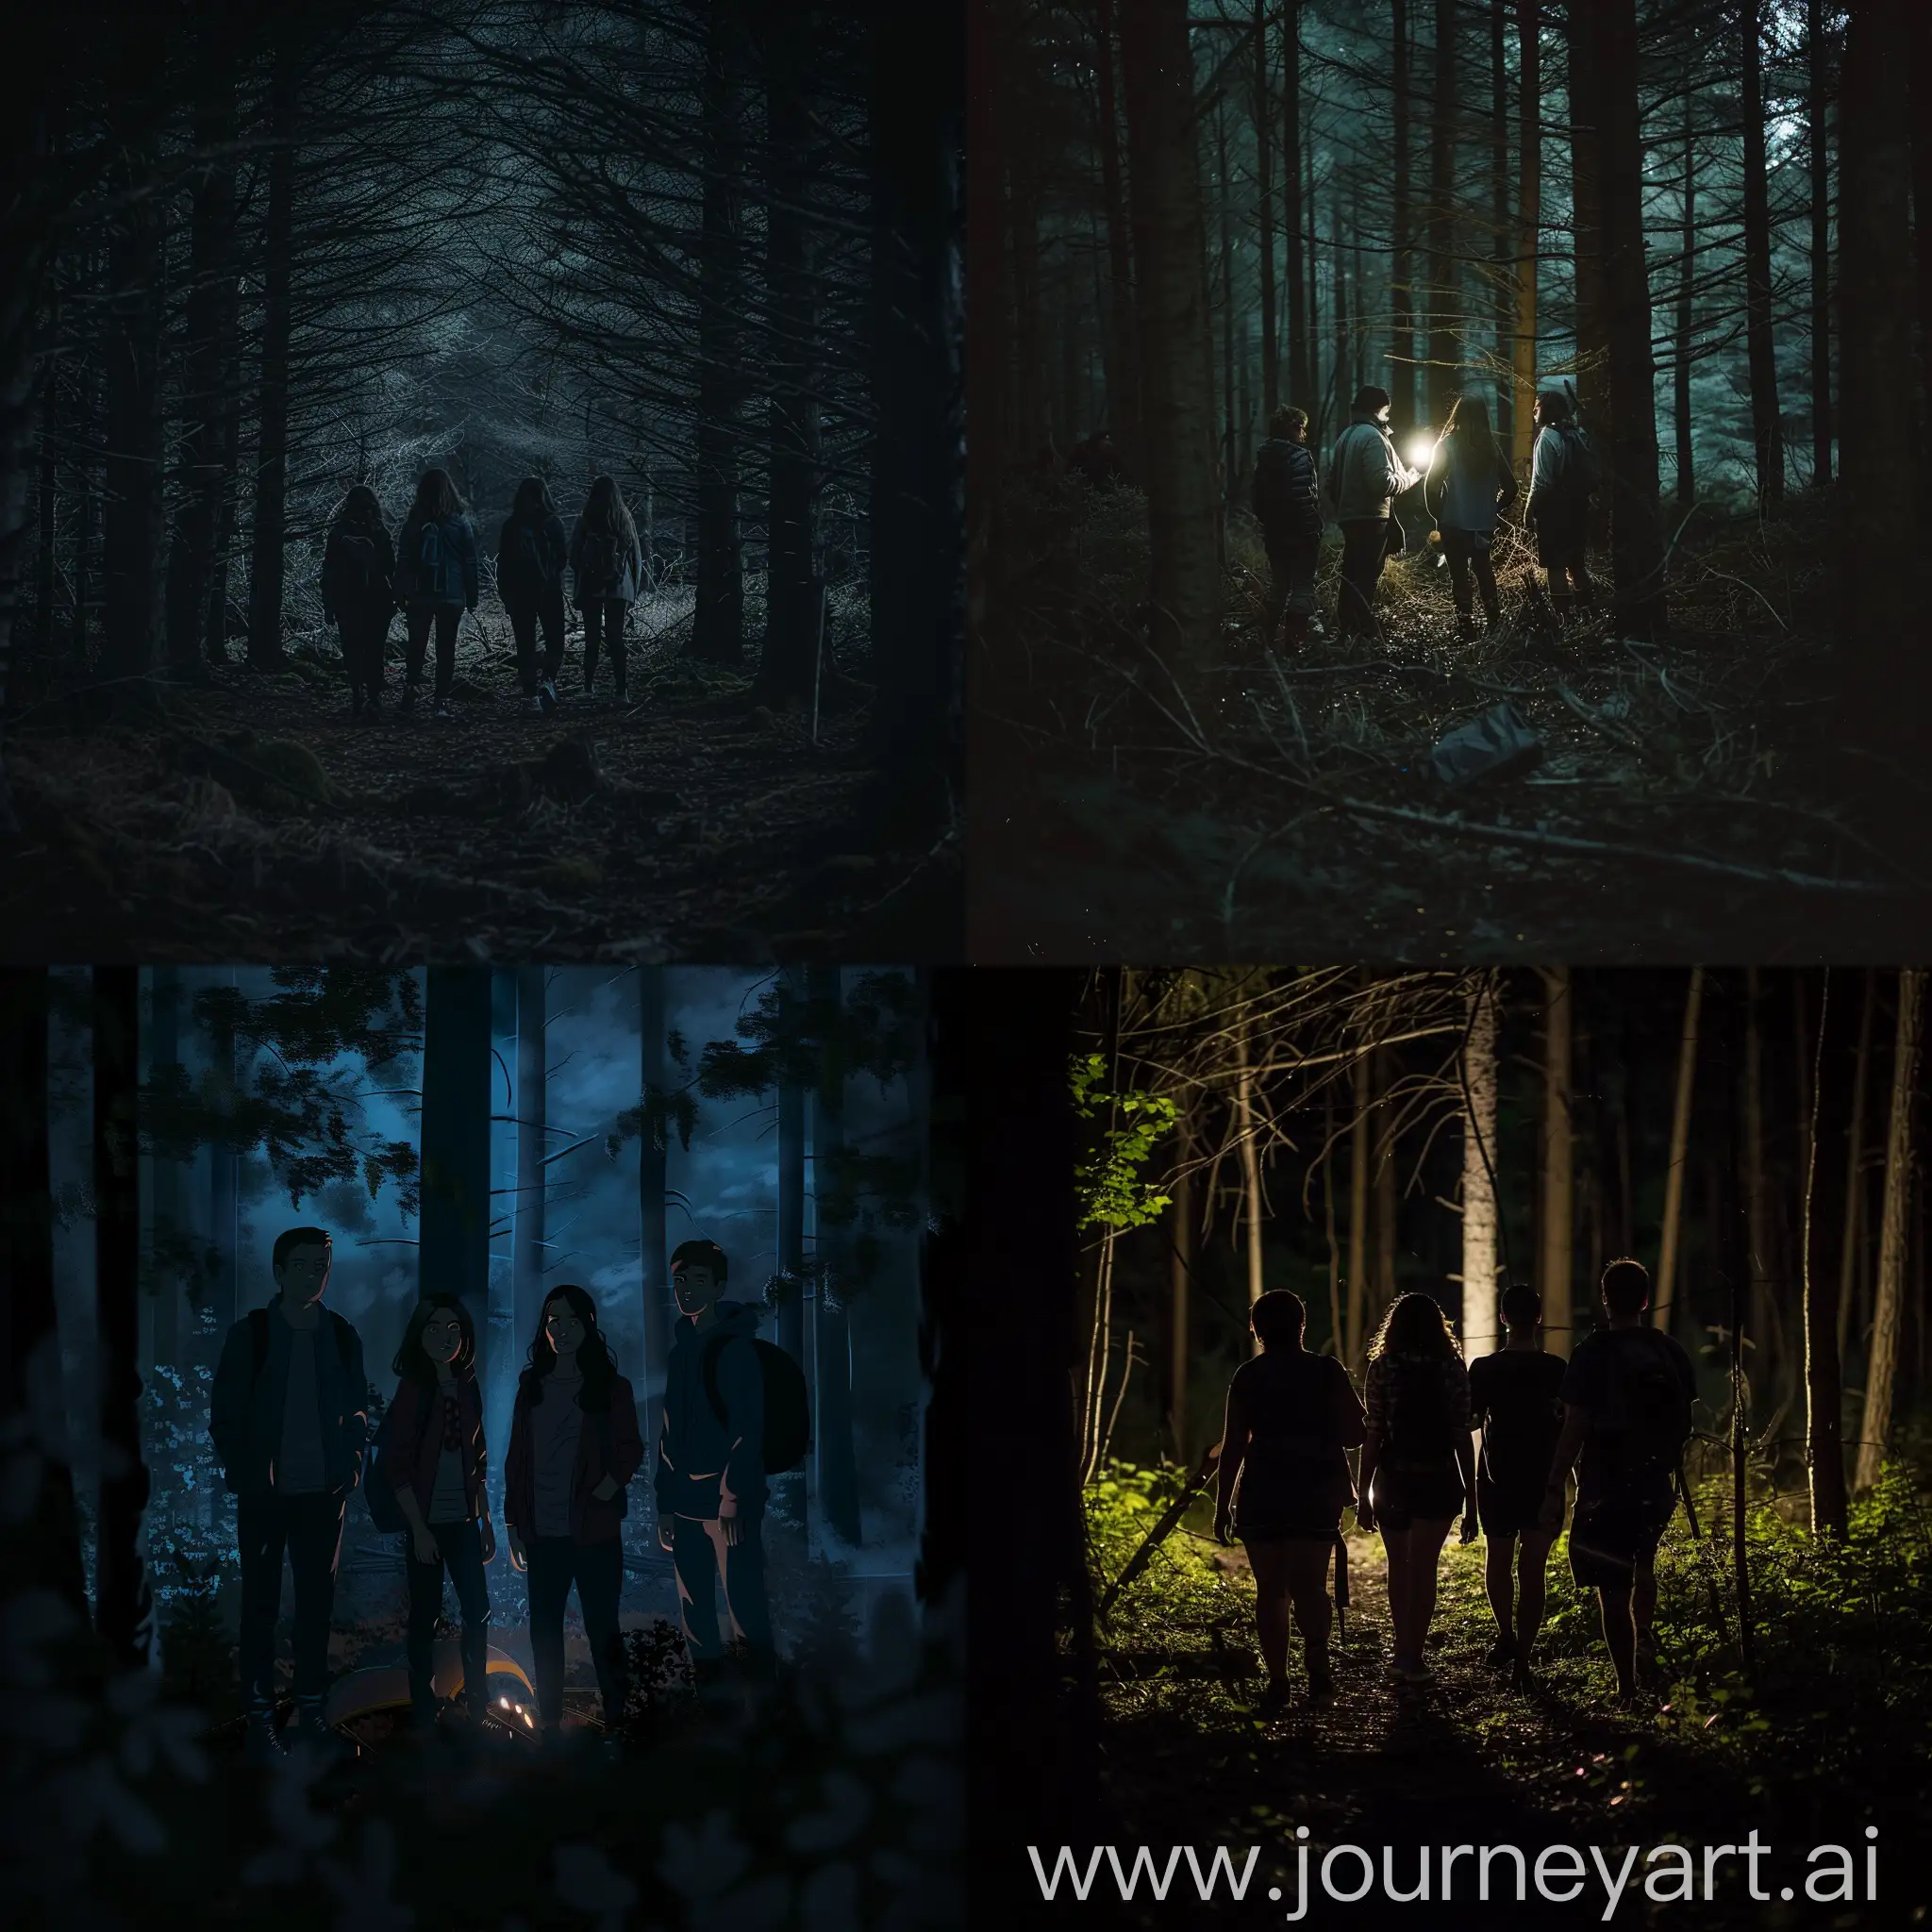 In the dark woods, there was a group of four friends who had decided to go camping that weekend.